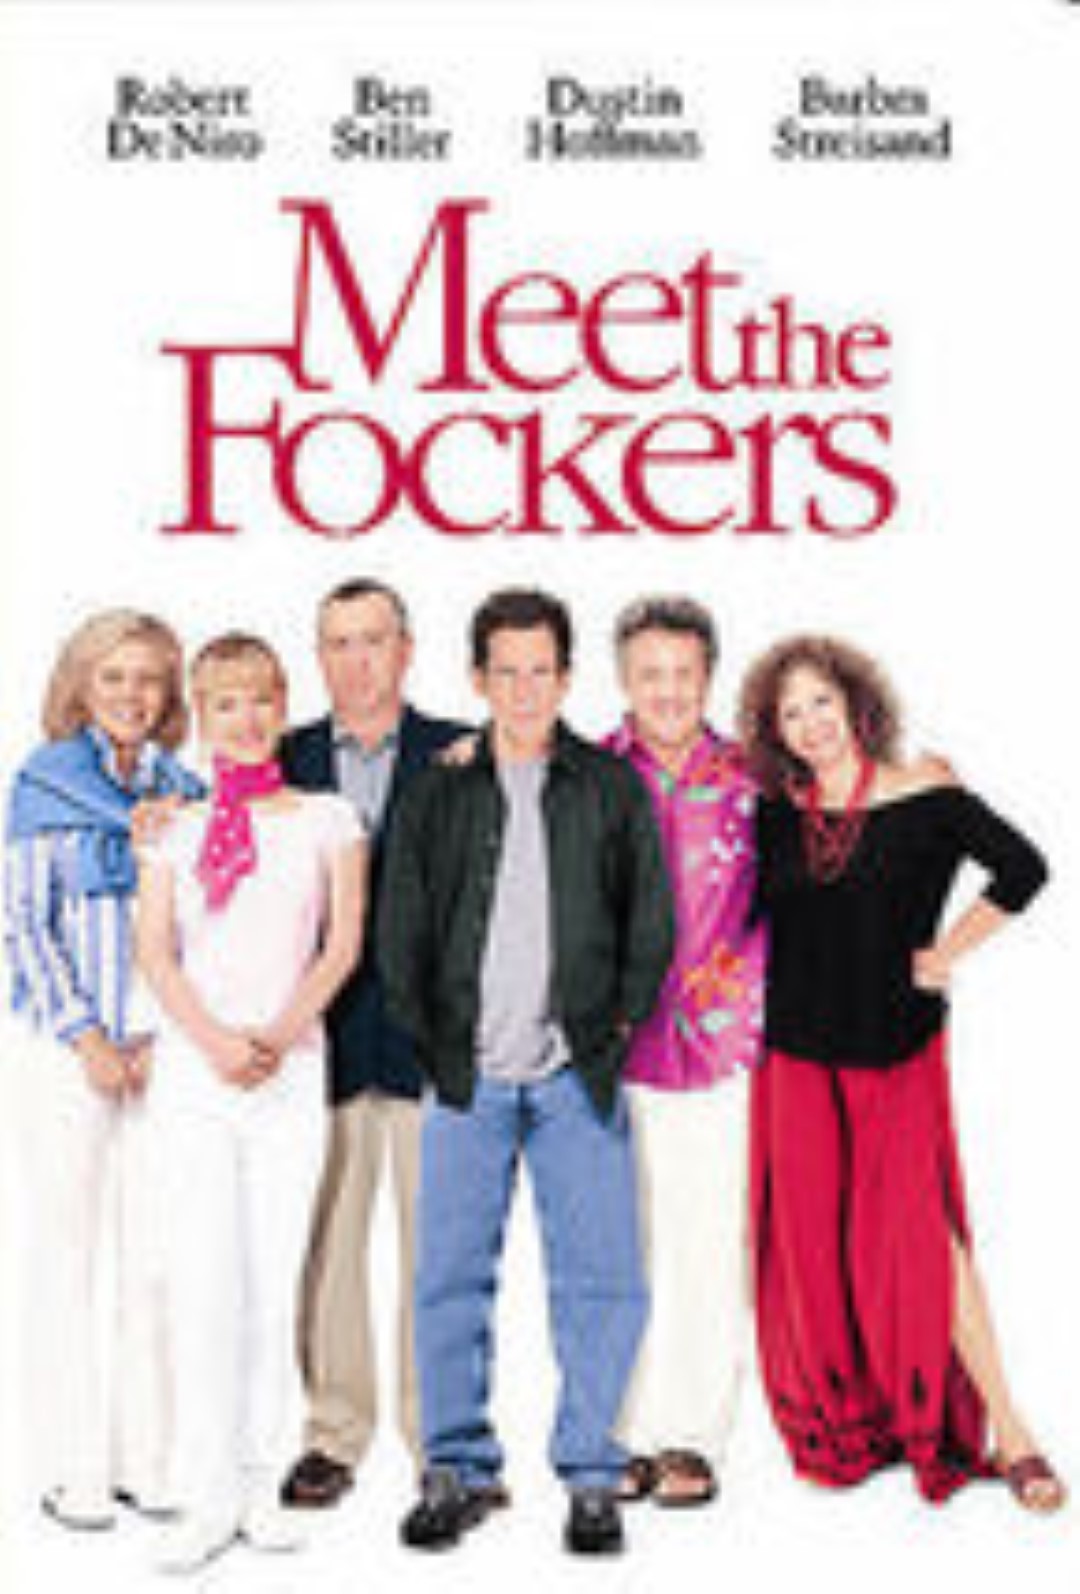 The fockers  large 